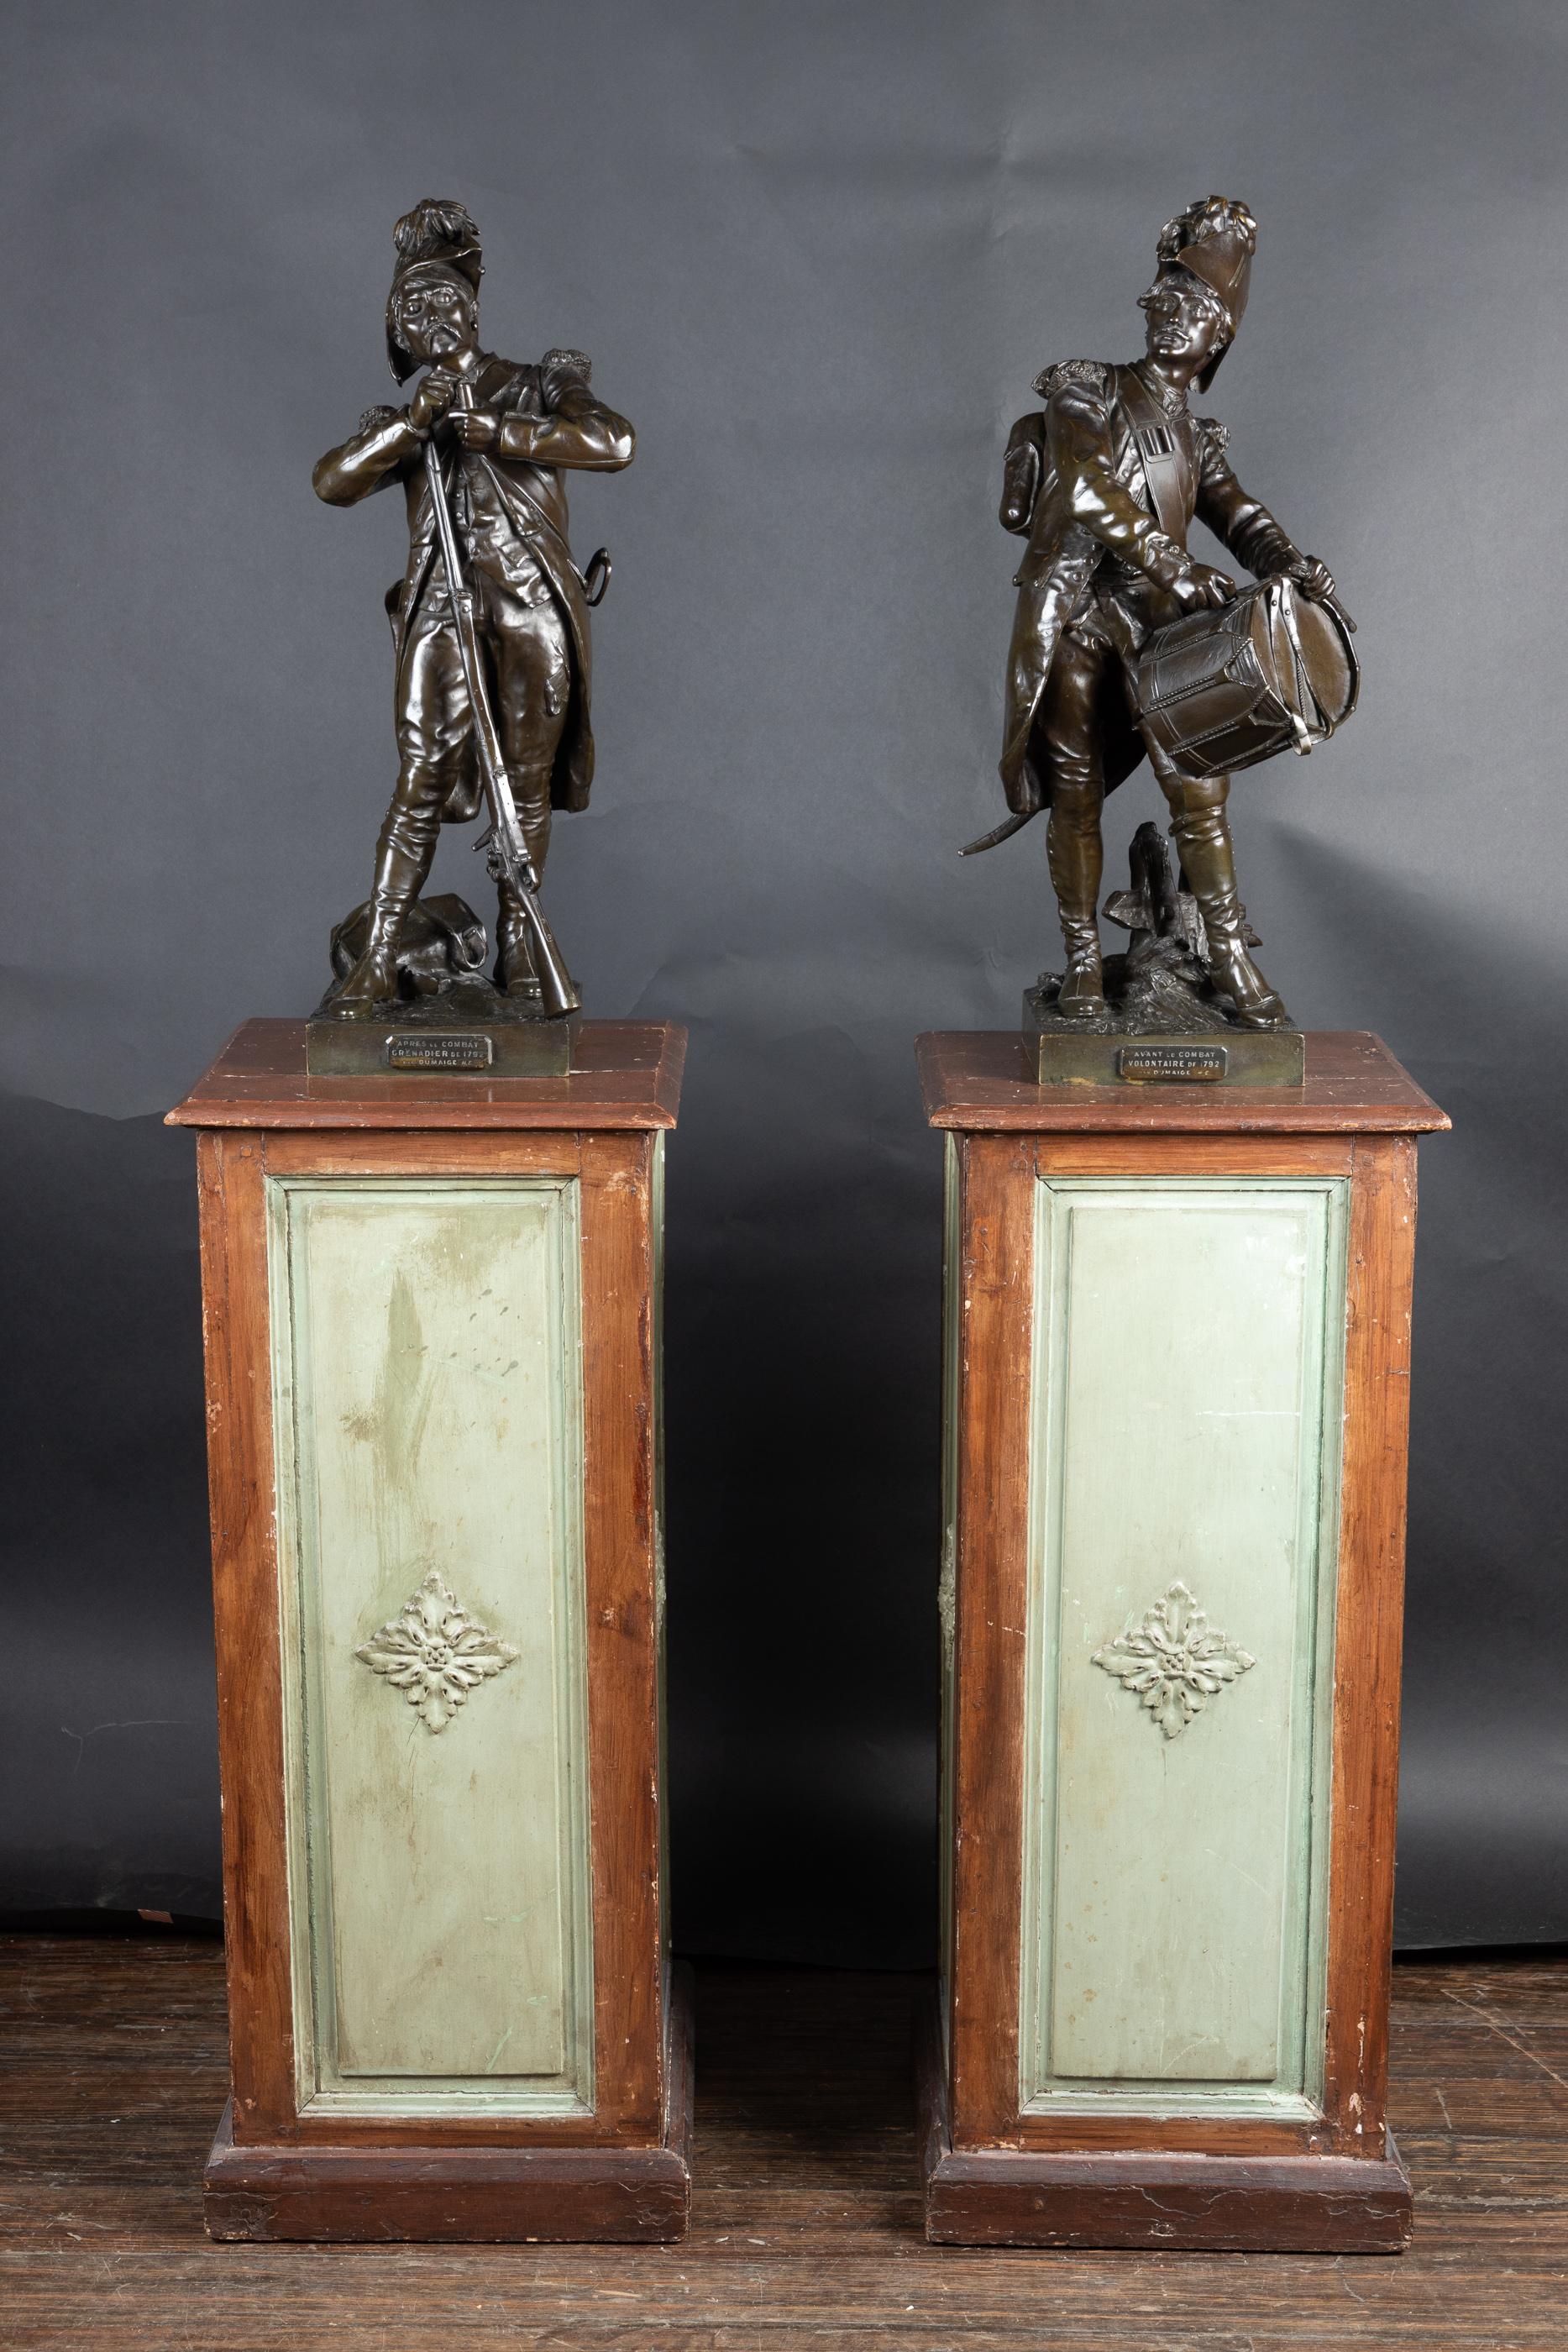 Fine 18th Century bronze figures of a military drummer and a soldier loading his musket. Both bronzes are placed on a square shallow plinth base with titled plaques and are signed to the side H. Dumaige

The soldier with drum features a plaque that